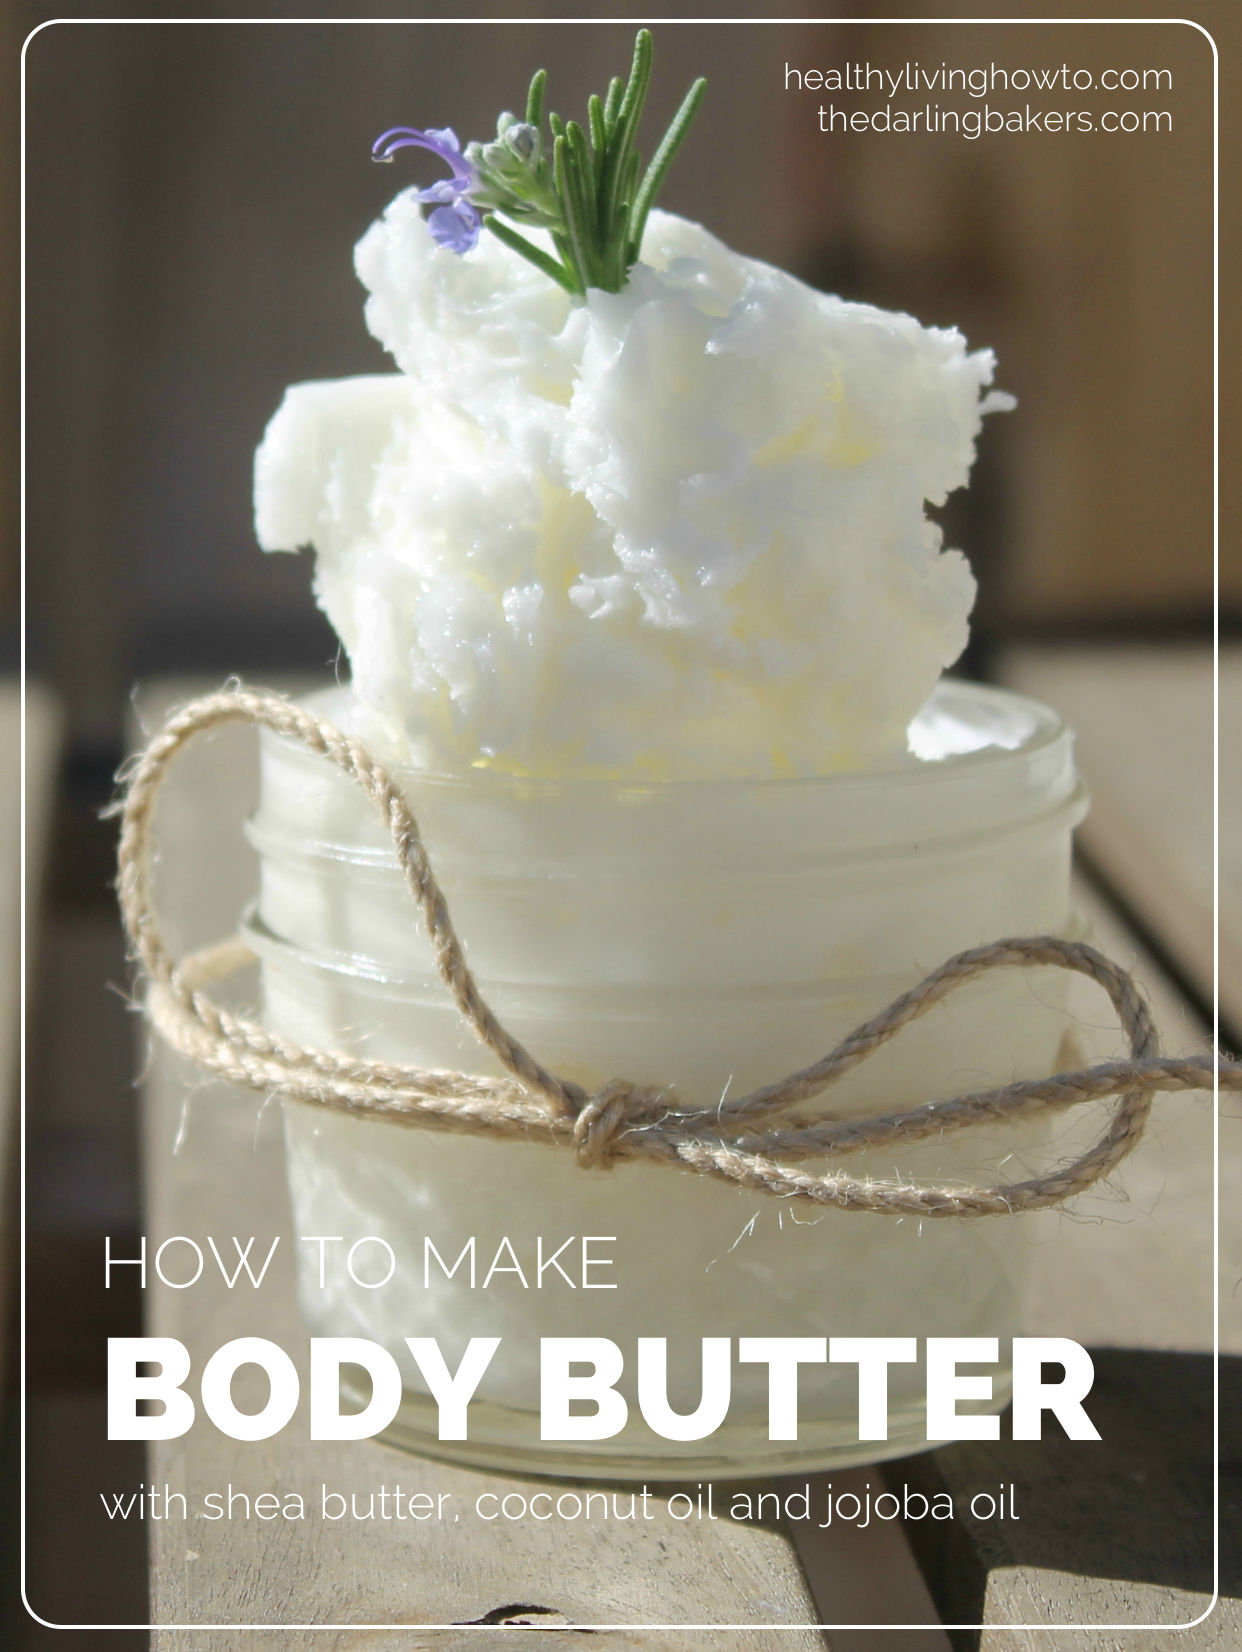 how to make body butter - healthy living how to